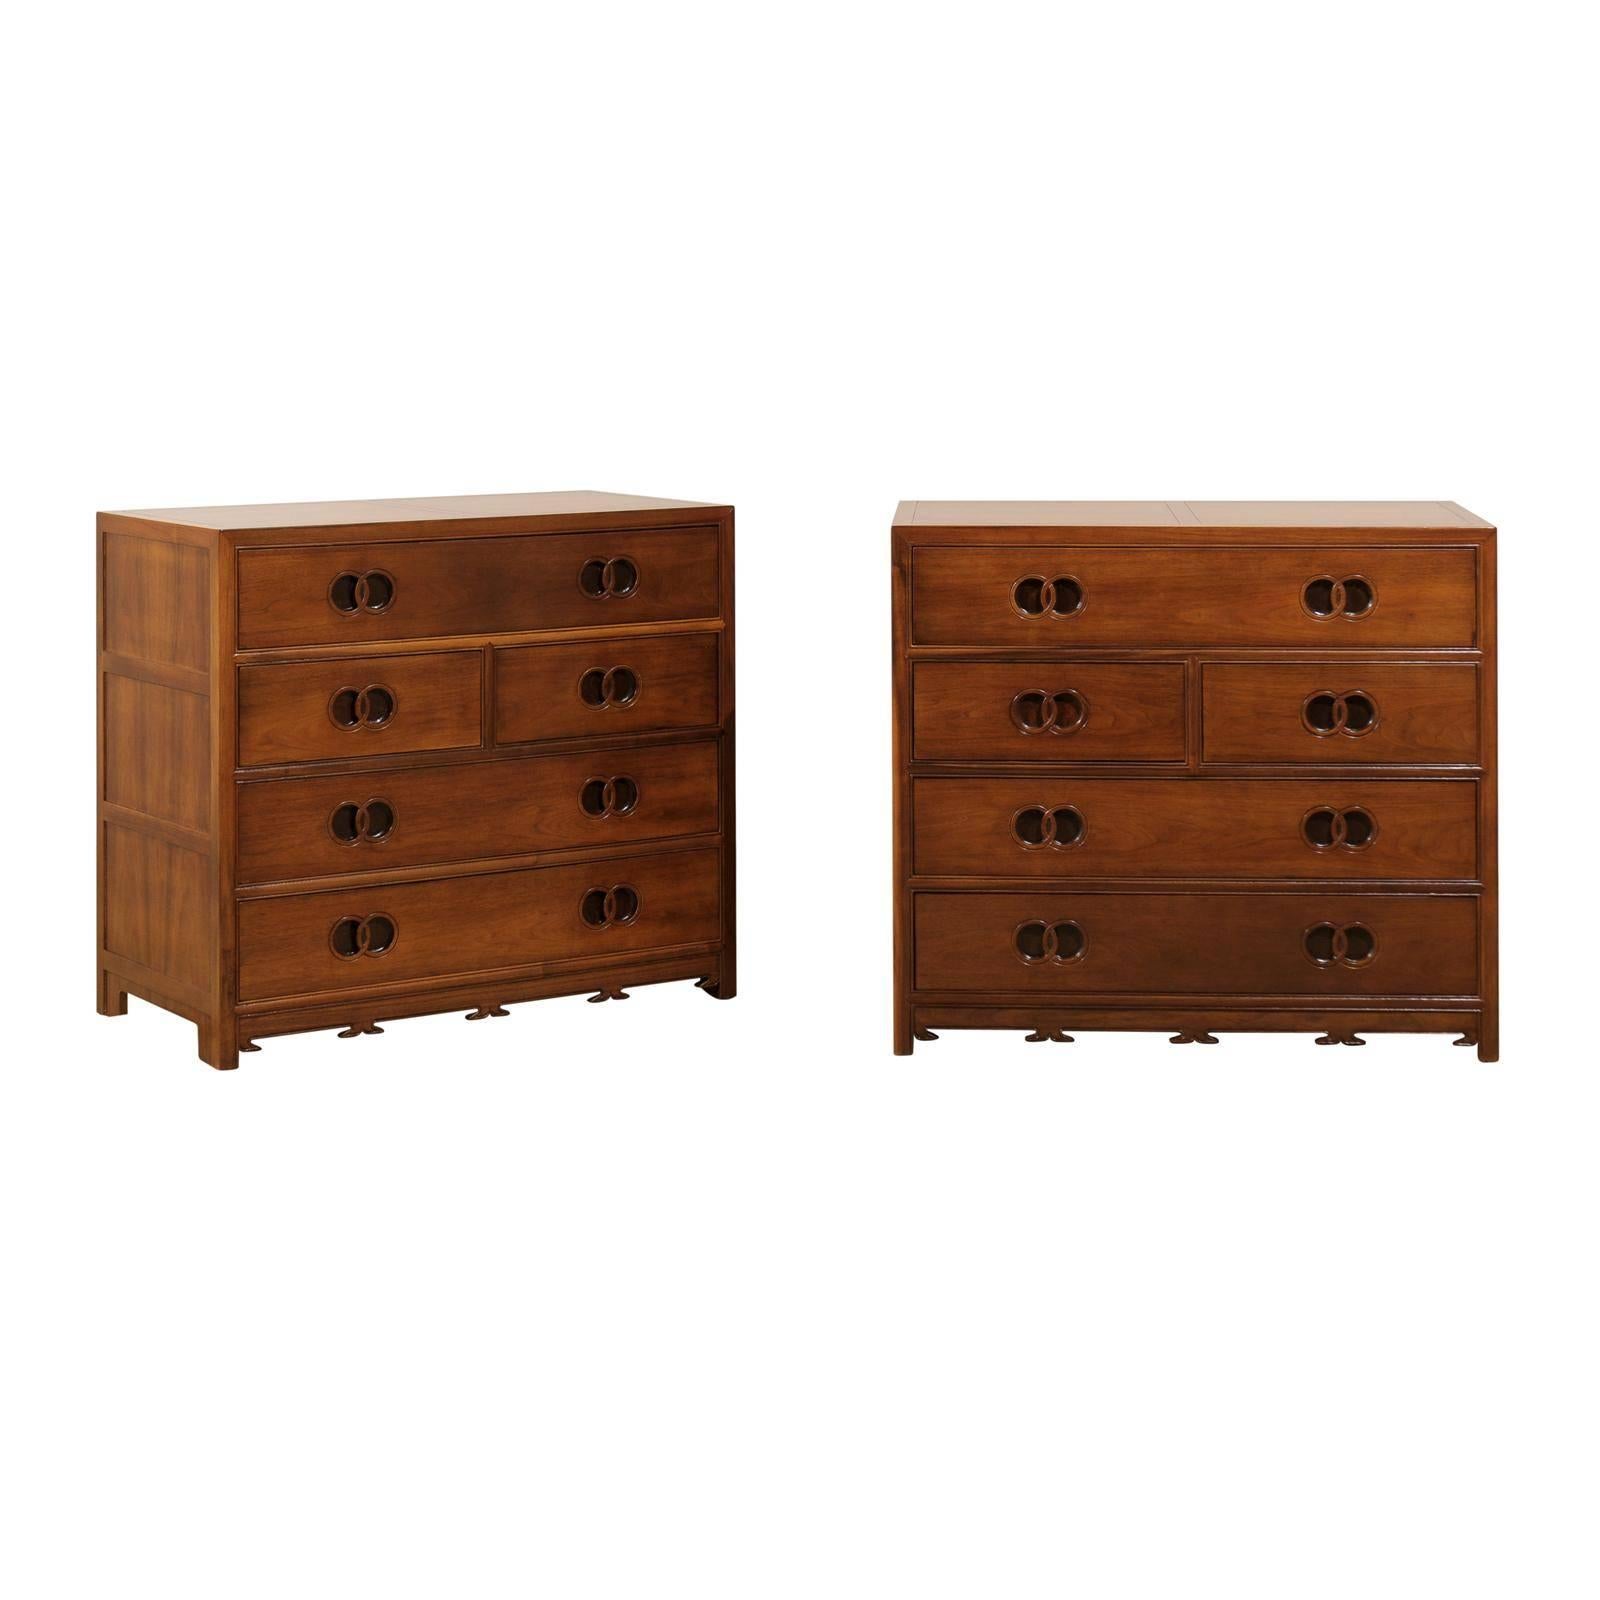 Stunning Restored Pair of Walnut Chests by Michael Taylor for Baker, circa 1960 For Sale